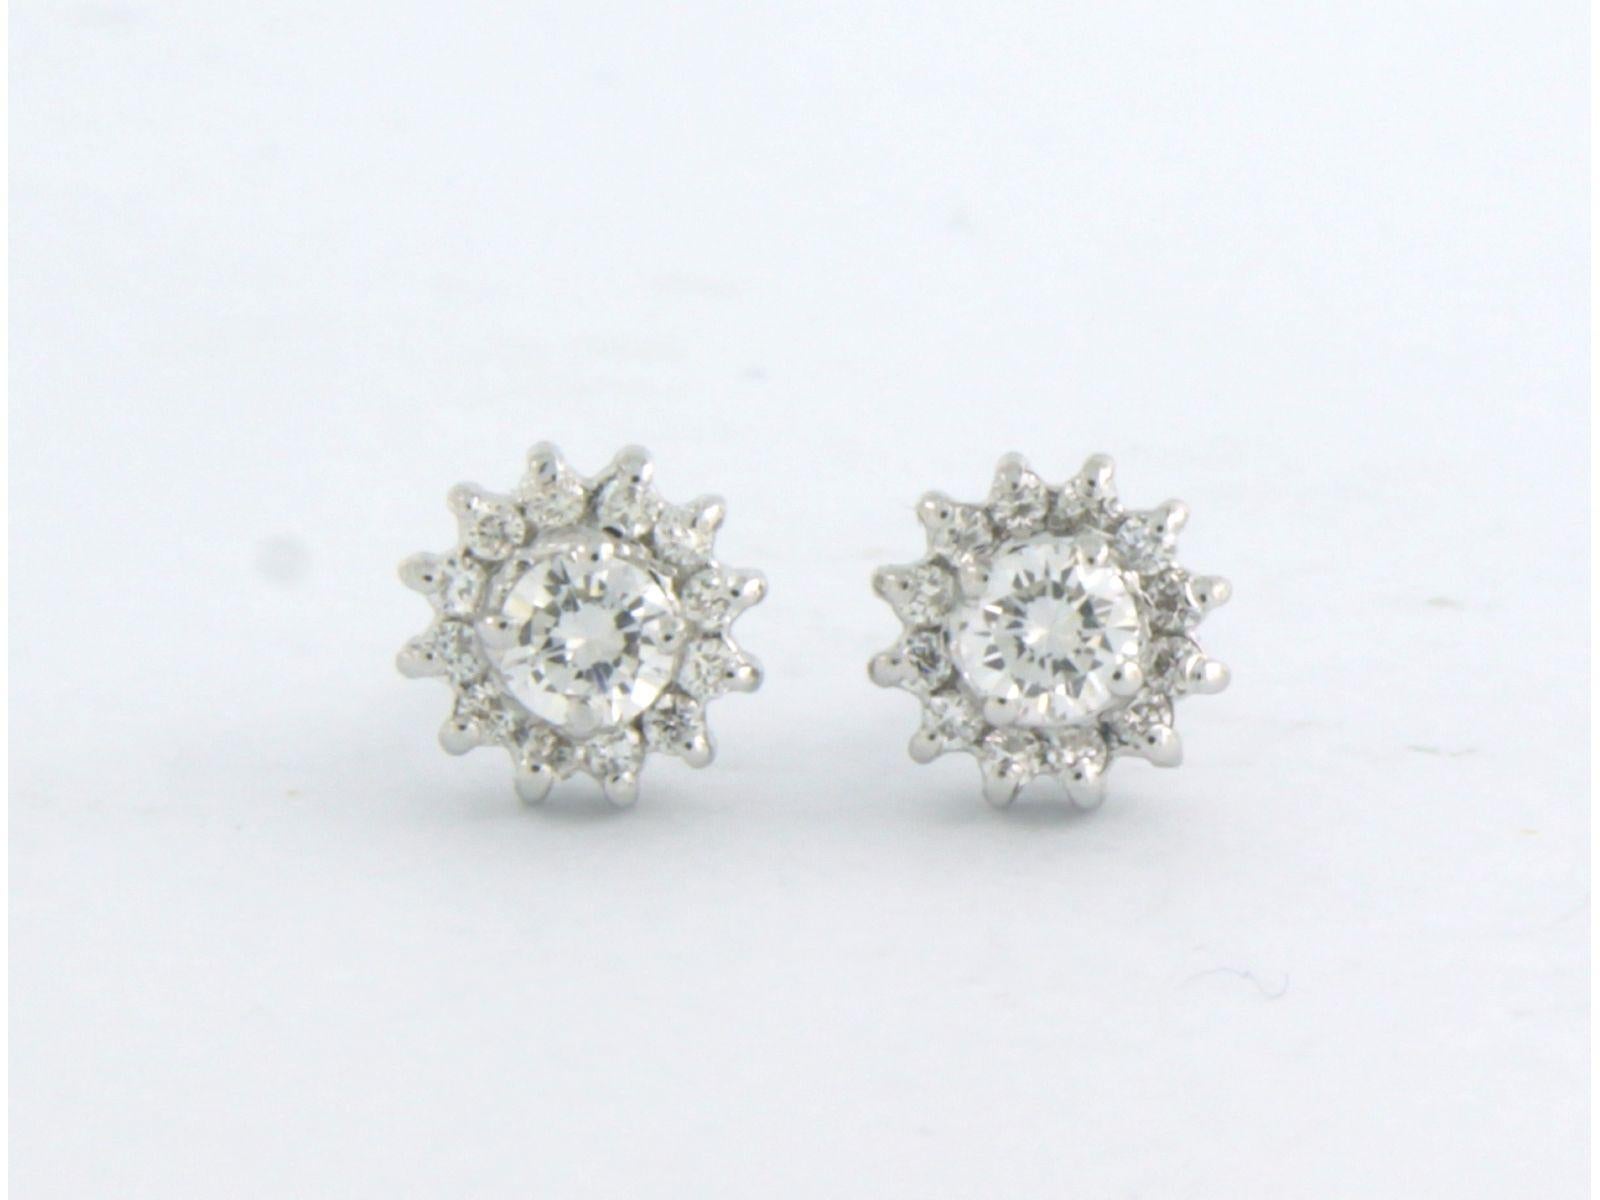 18k white gold stud earrings set with brilliant cut diamonds up to. 0.38ct - F/G - VS/SI

detailed description

the size of the ear stud is 6.5 mm wide

weight 1.9 grams

set with

- 2 x 3.2 mm brilliant cut diamond, approximately 0.24 carats in